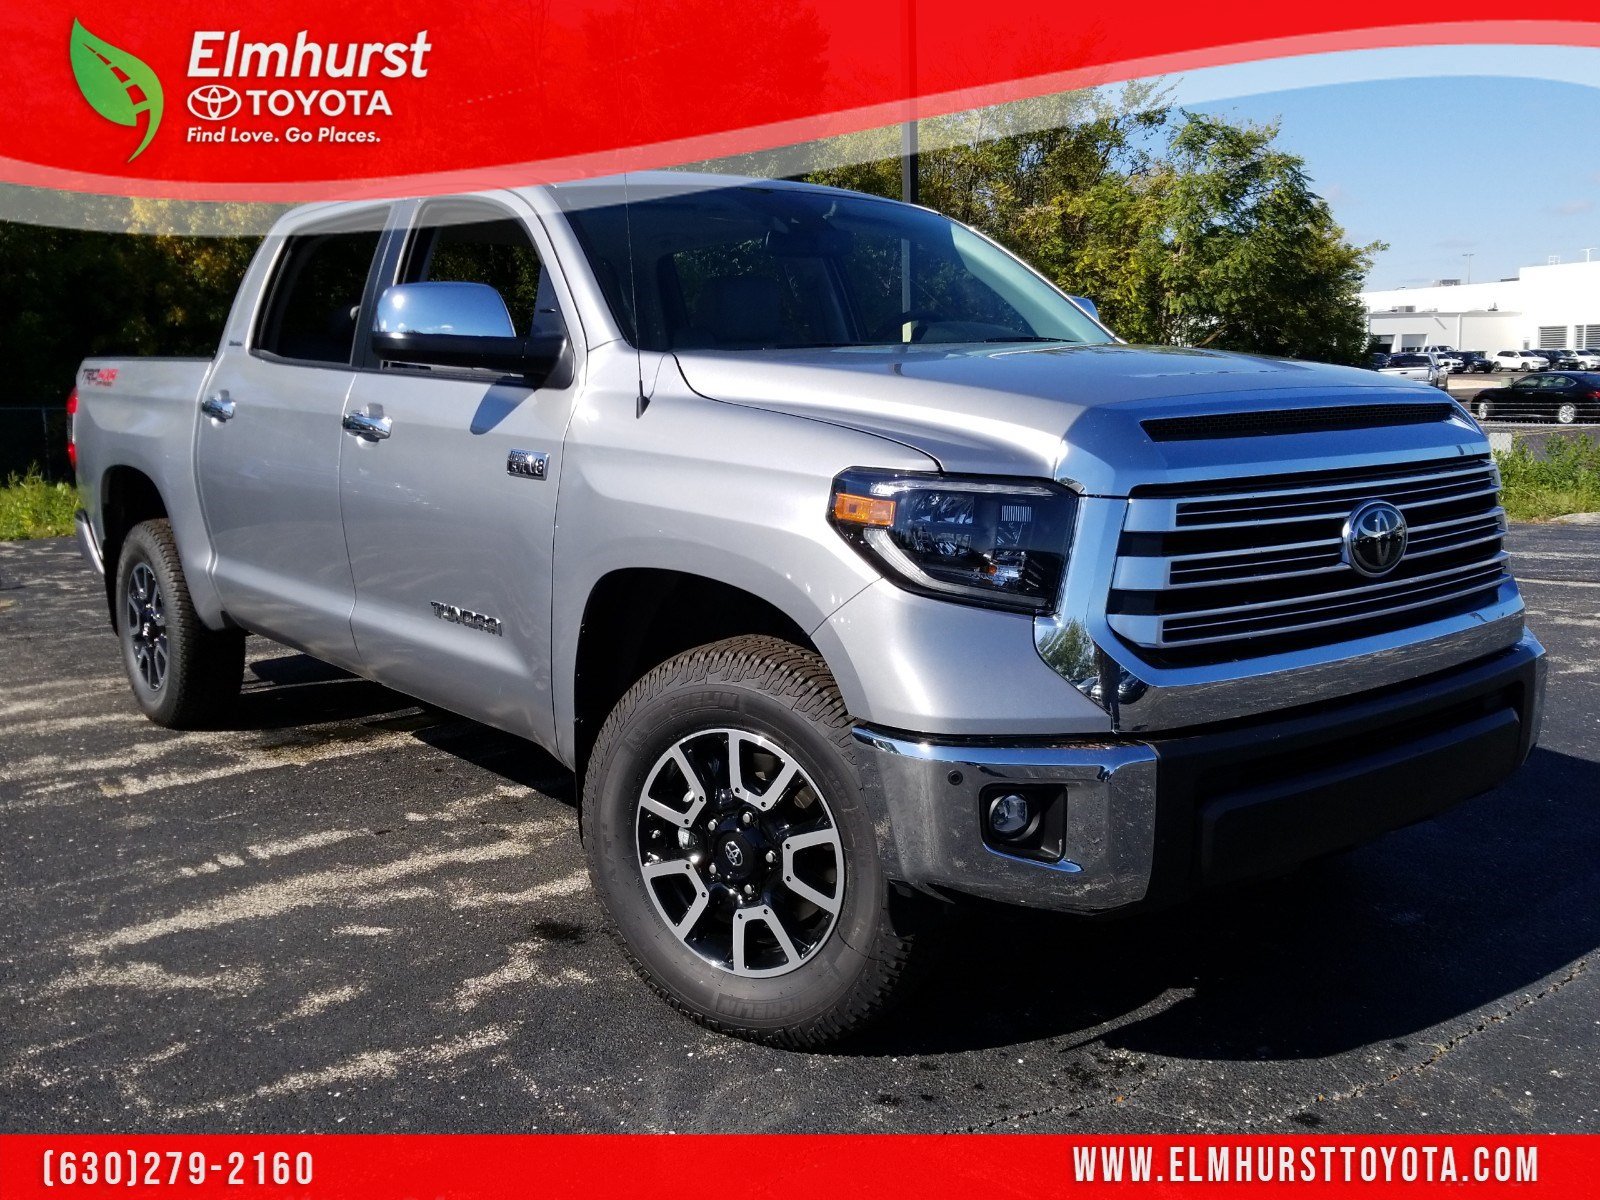 New 2019 Toyota Tundra Limited Crew Cab Pickup Crew Cab Pickup in